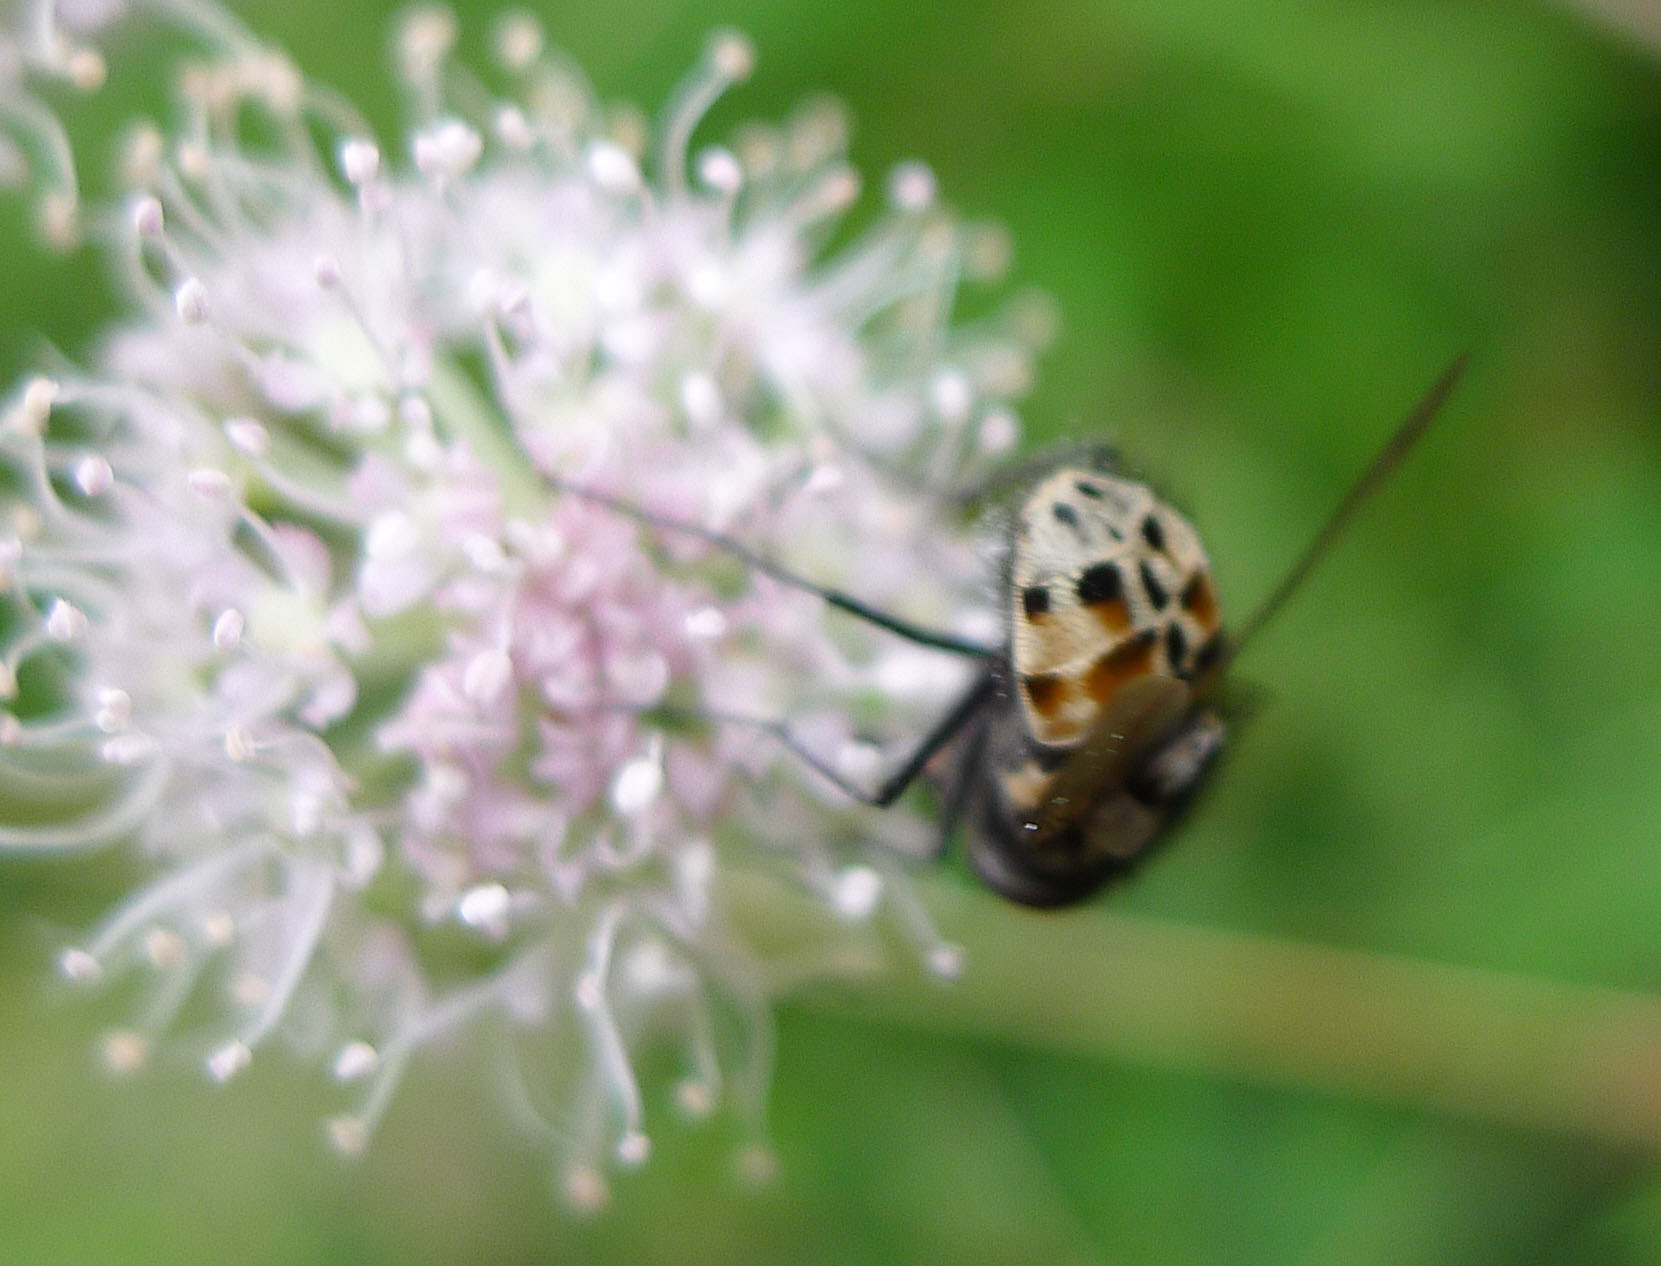 a bug with spotted patterns sits on the white flowers